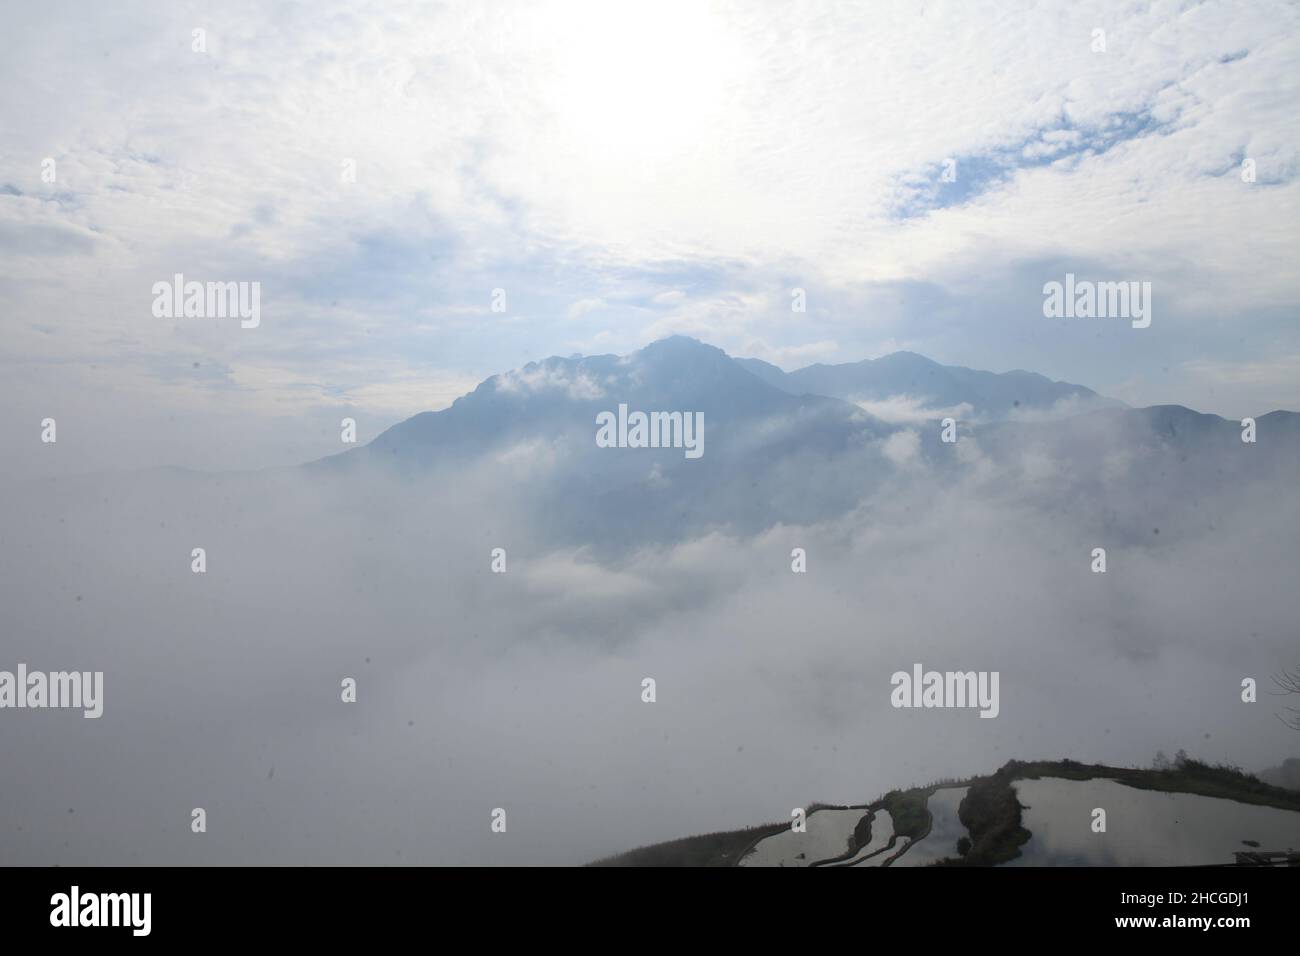 Beautiful view of rocky mountains enveloped in white clouds Stock Photo